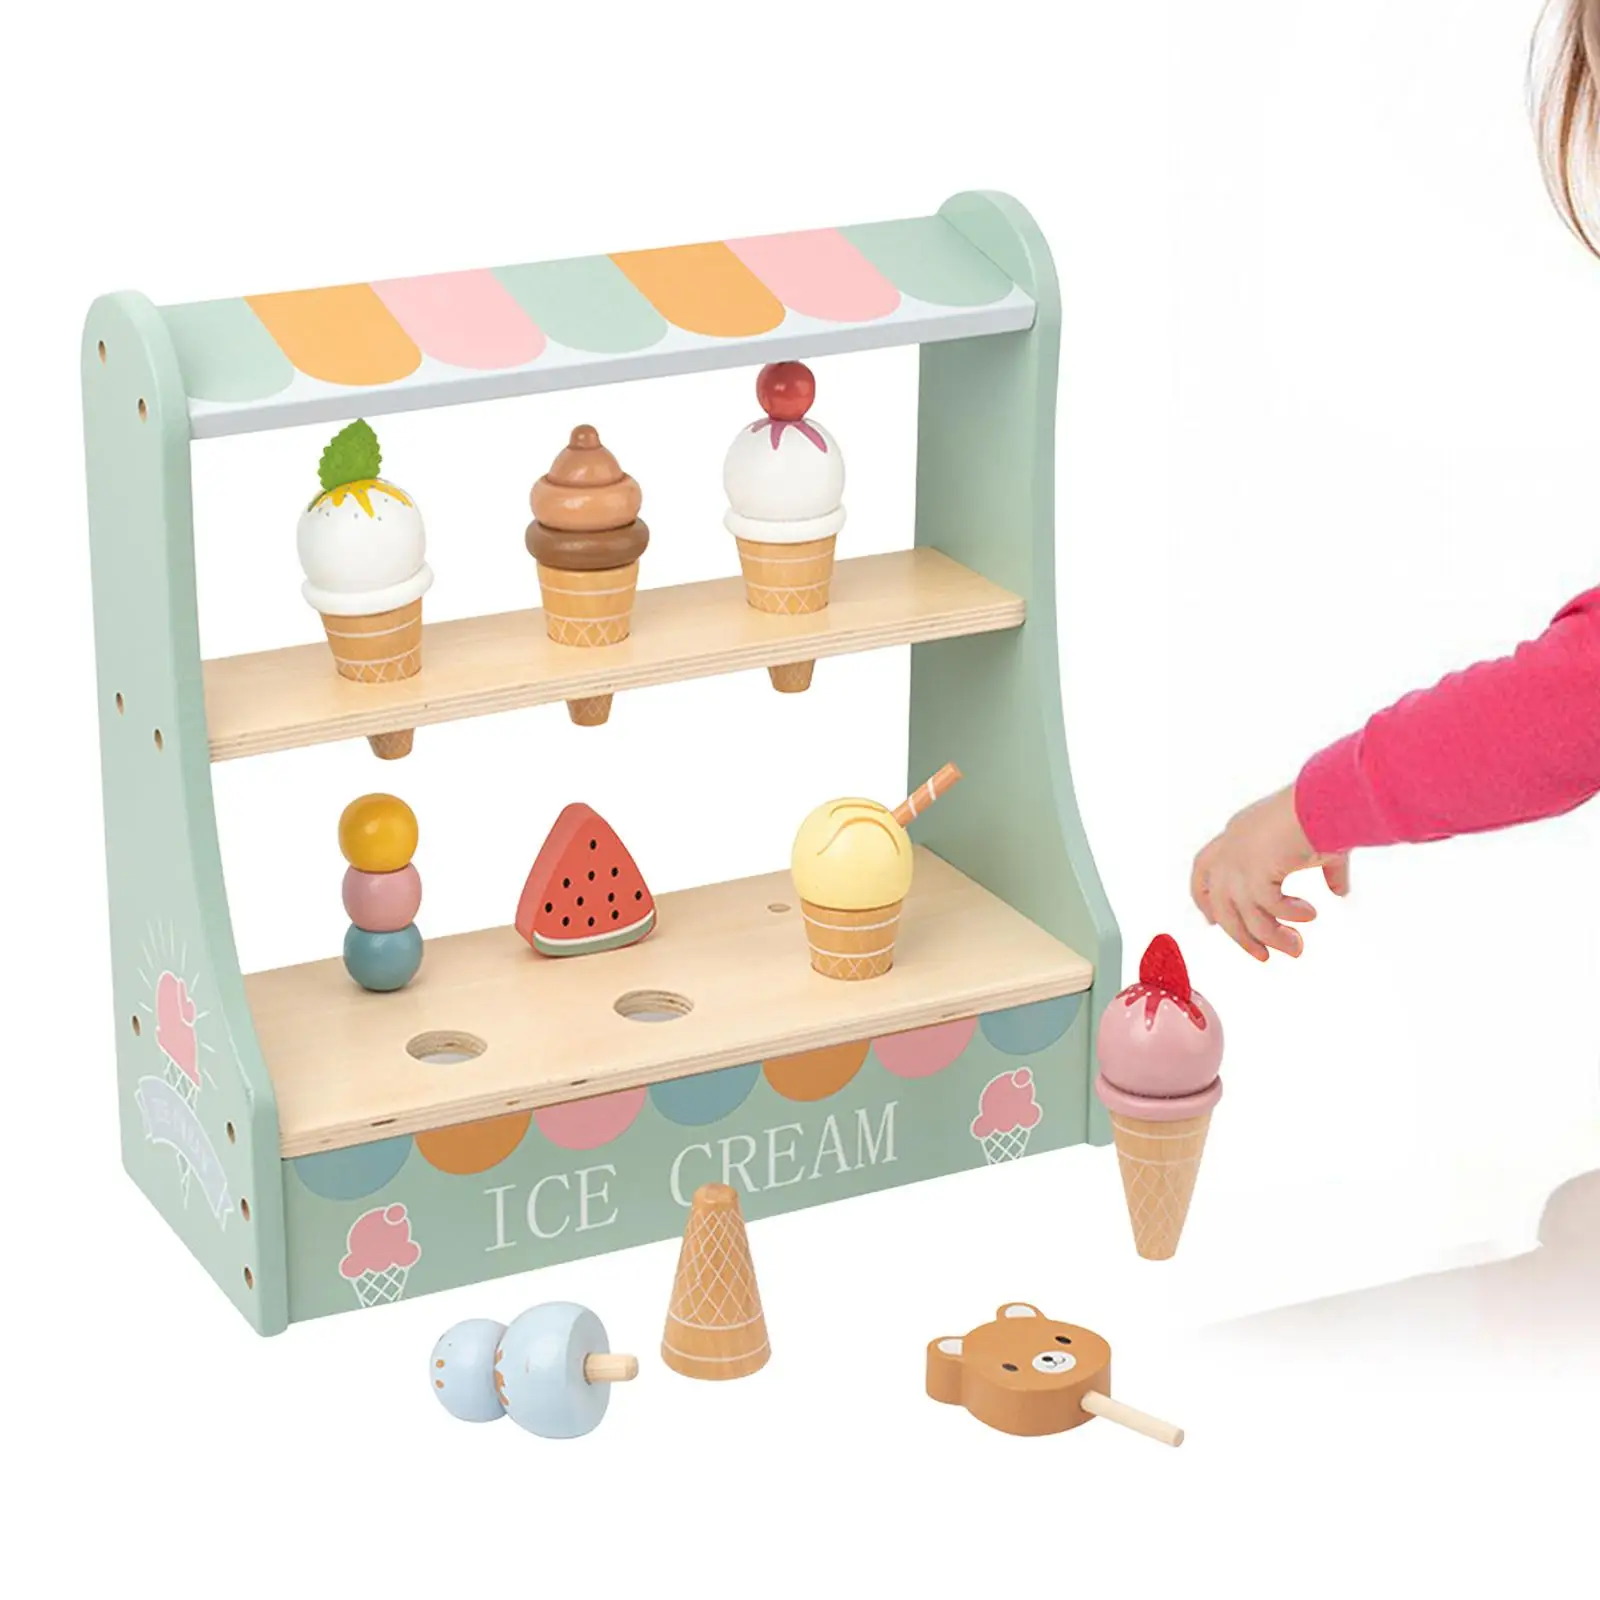 Ice Cream Toys Play Set Simulation Ice Cream for Kids Age 2-4 Birthday Gifts